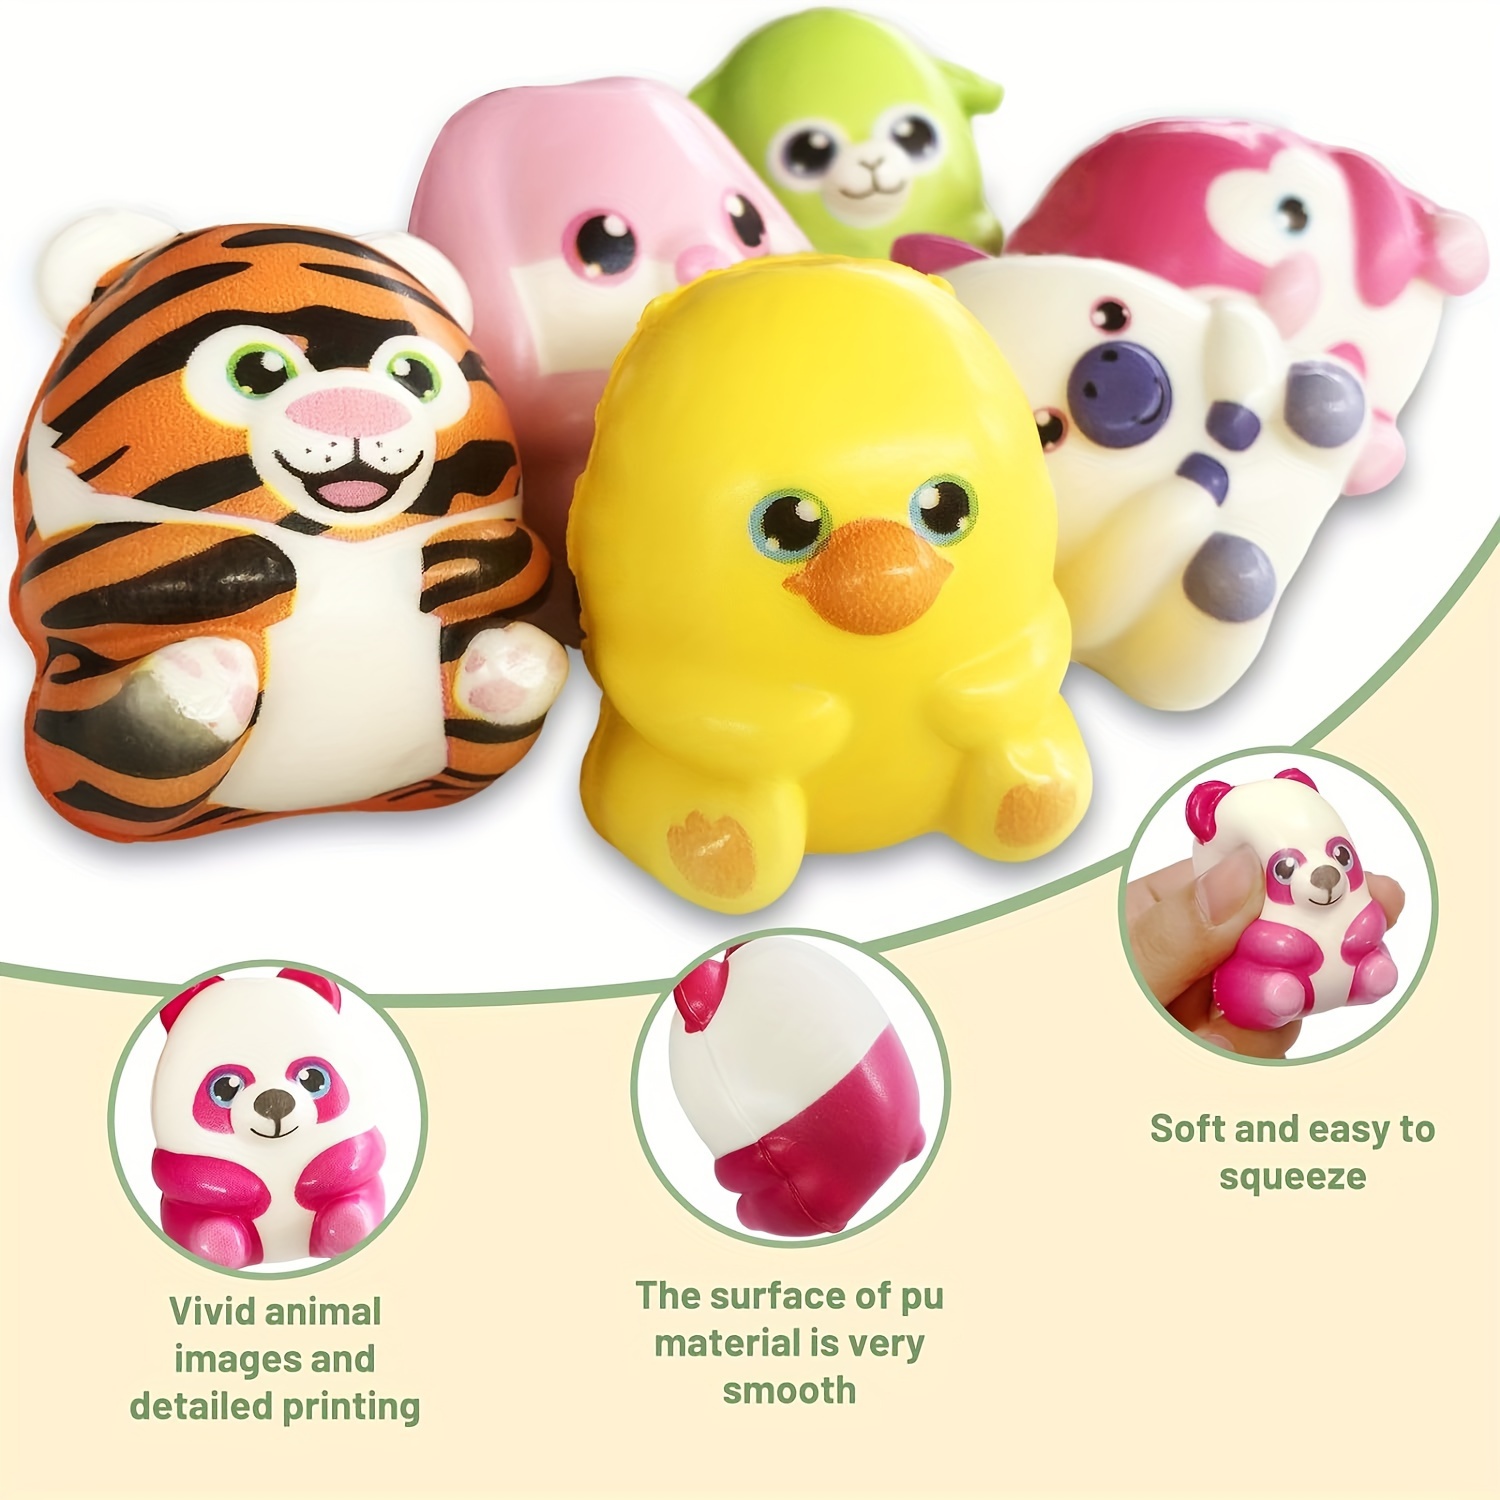 Plush Squishy Slow Rising Foamed Stuffed Animal Squeeze Toys Soft Adorable  Squishies PU Stress Relief Toy Christmas Gifts - AliExpress